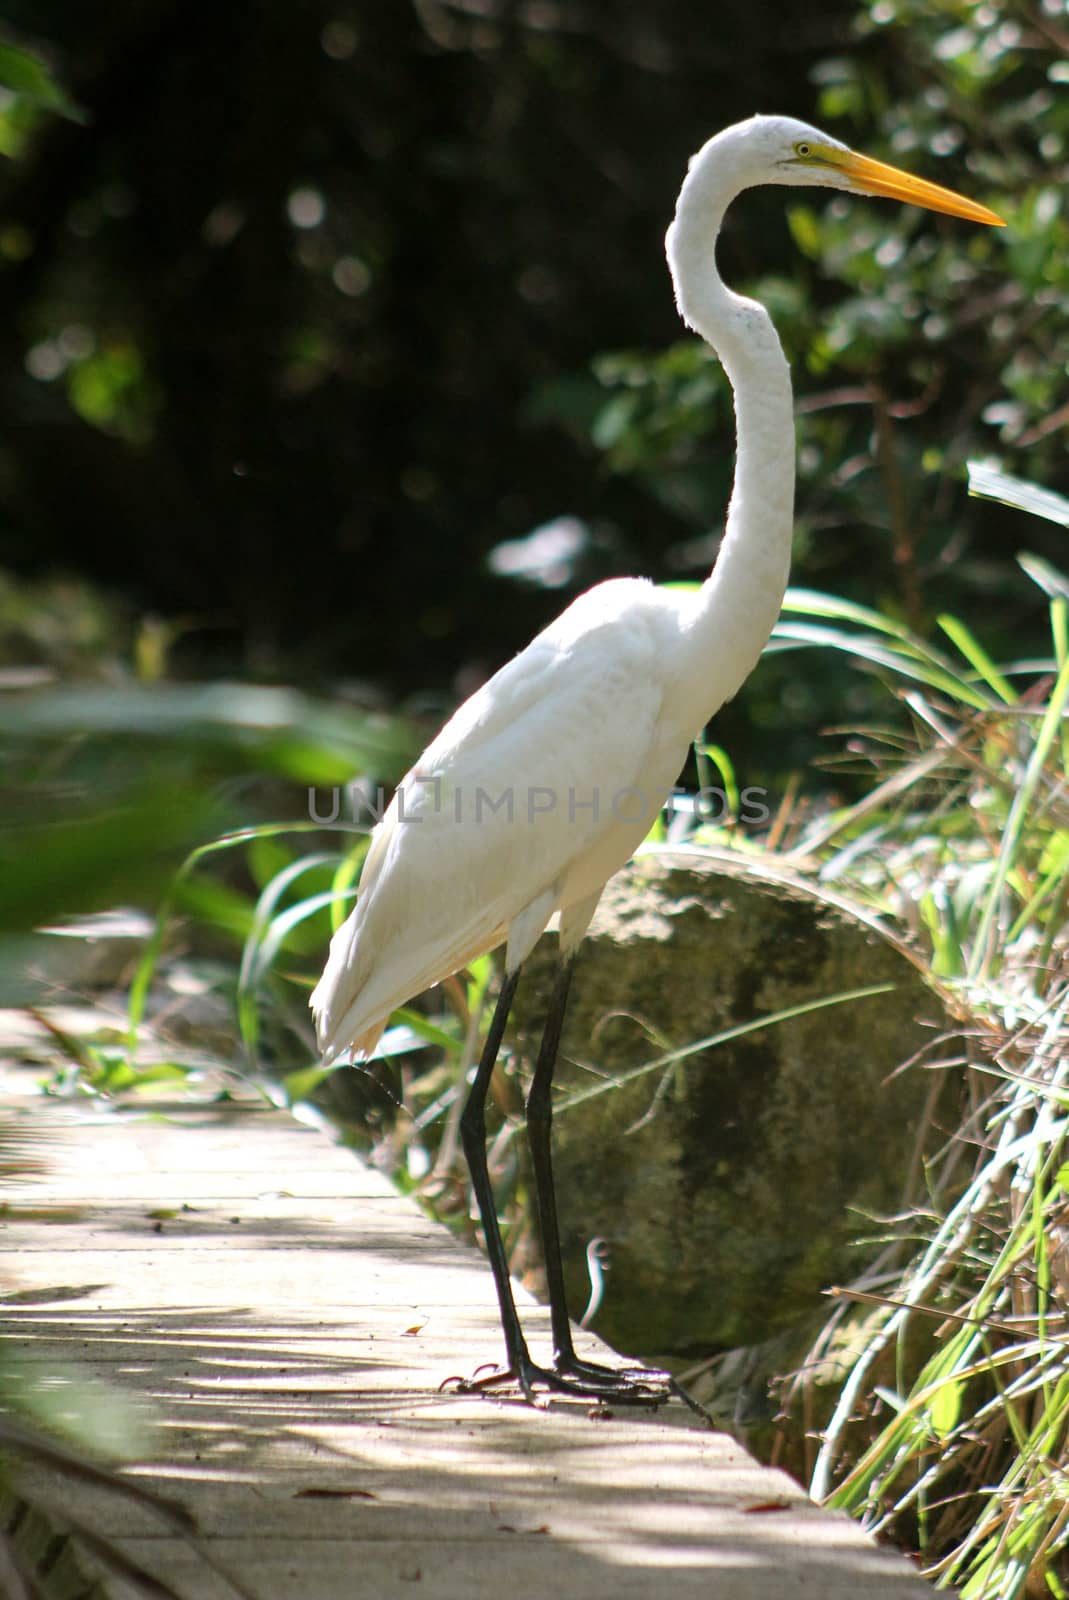 A Great Egret (Ardea Alba) standing alone near wetlands in the Mayan Riviera, Mexico